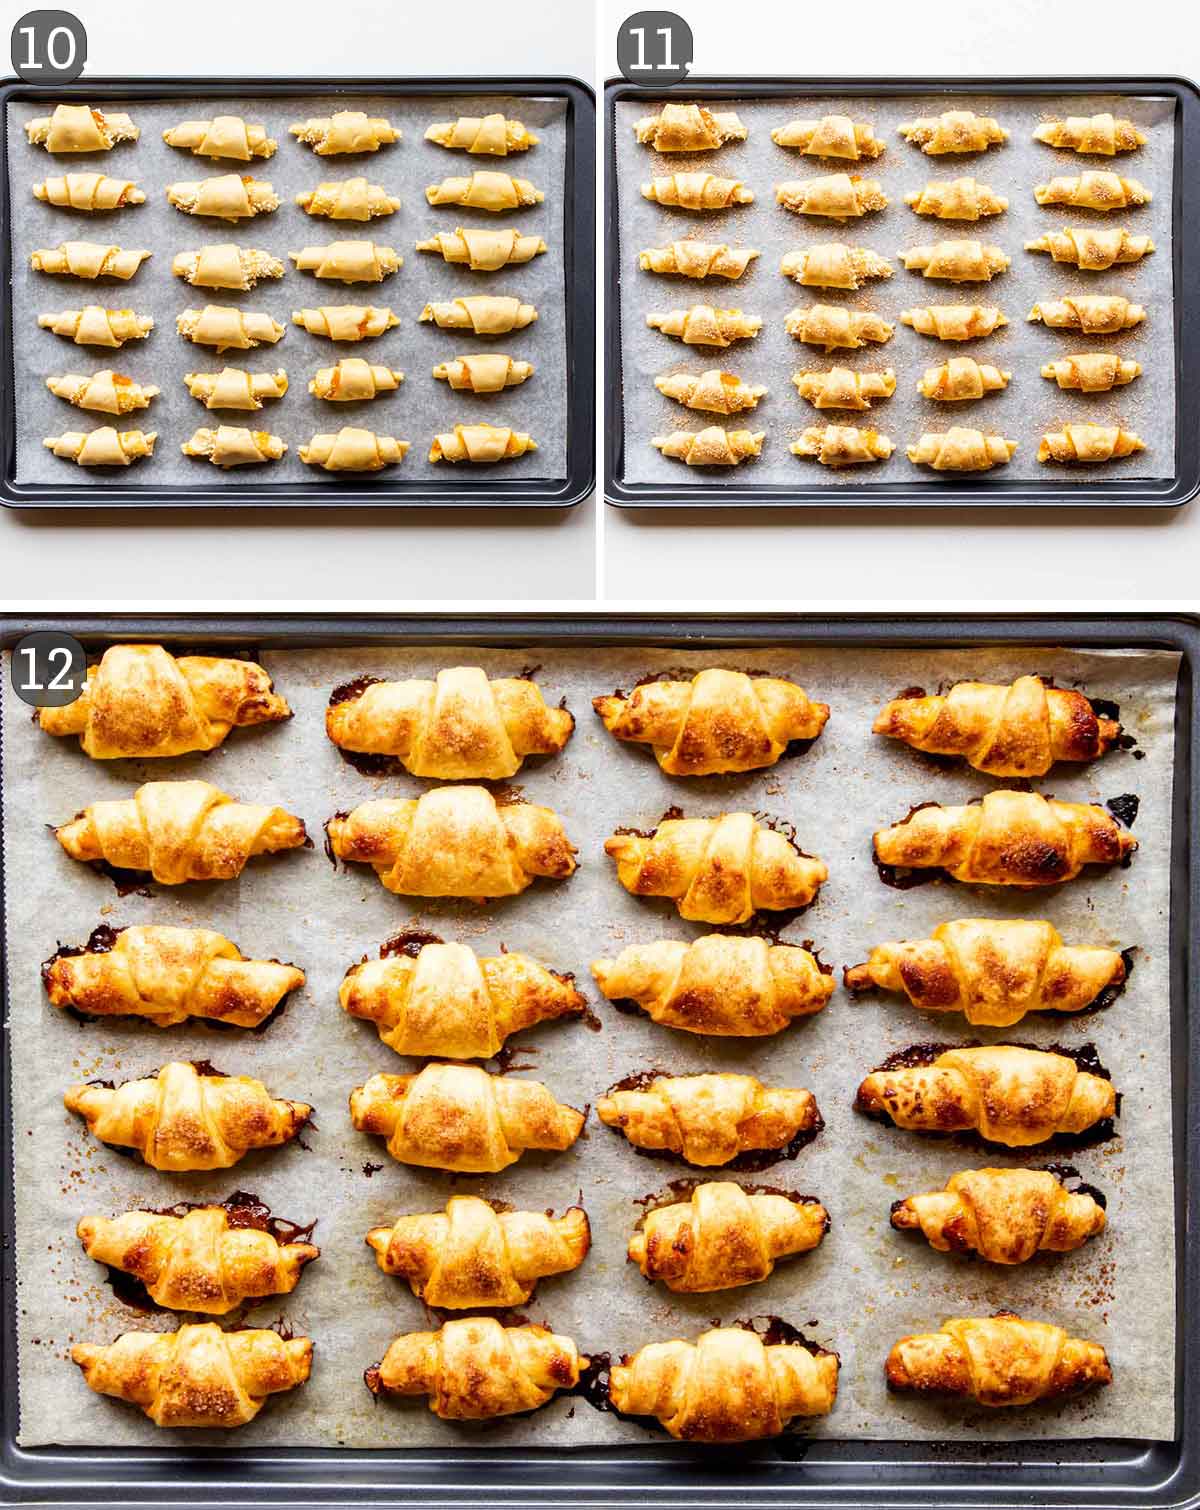 before and after baking shots of rugelach cookies on parchment paper.